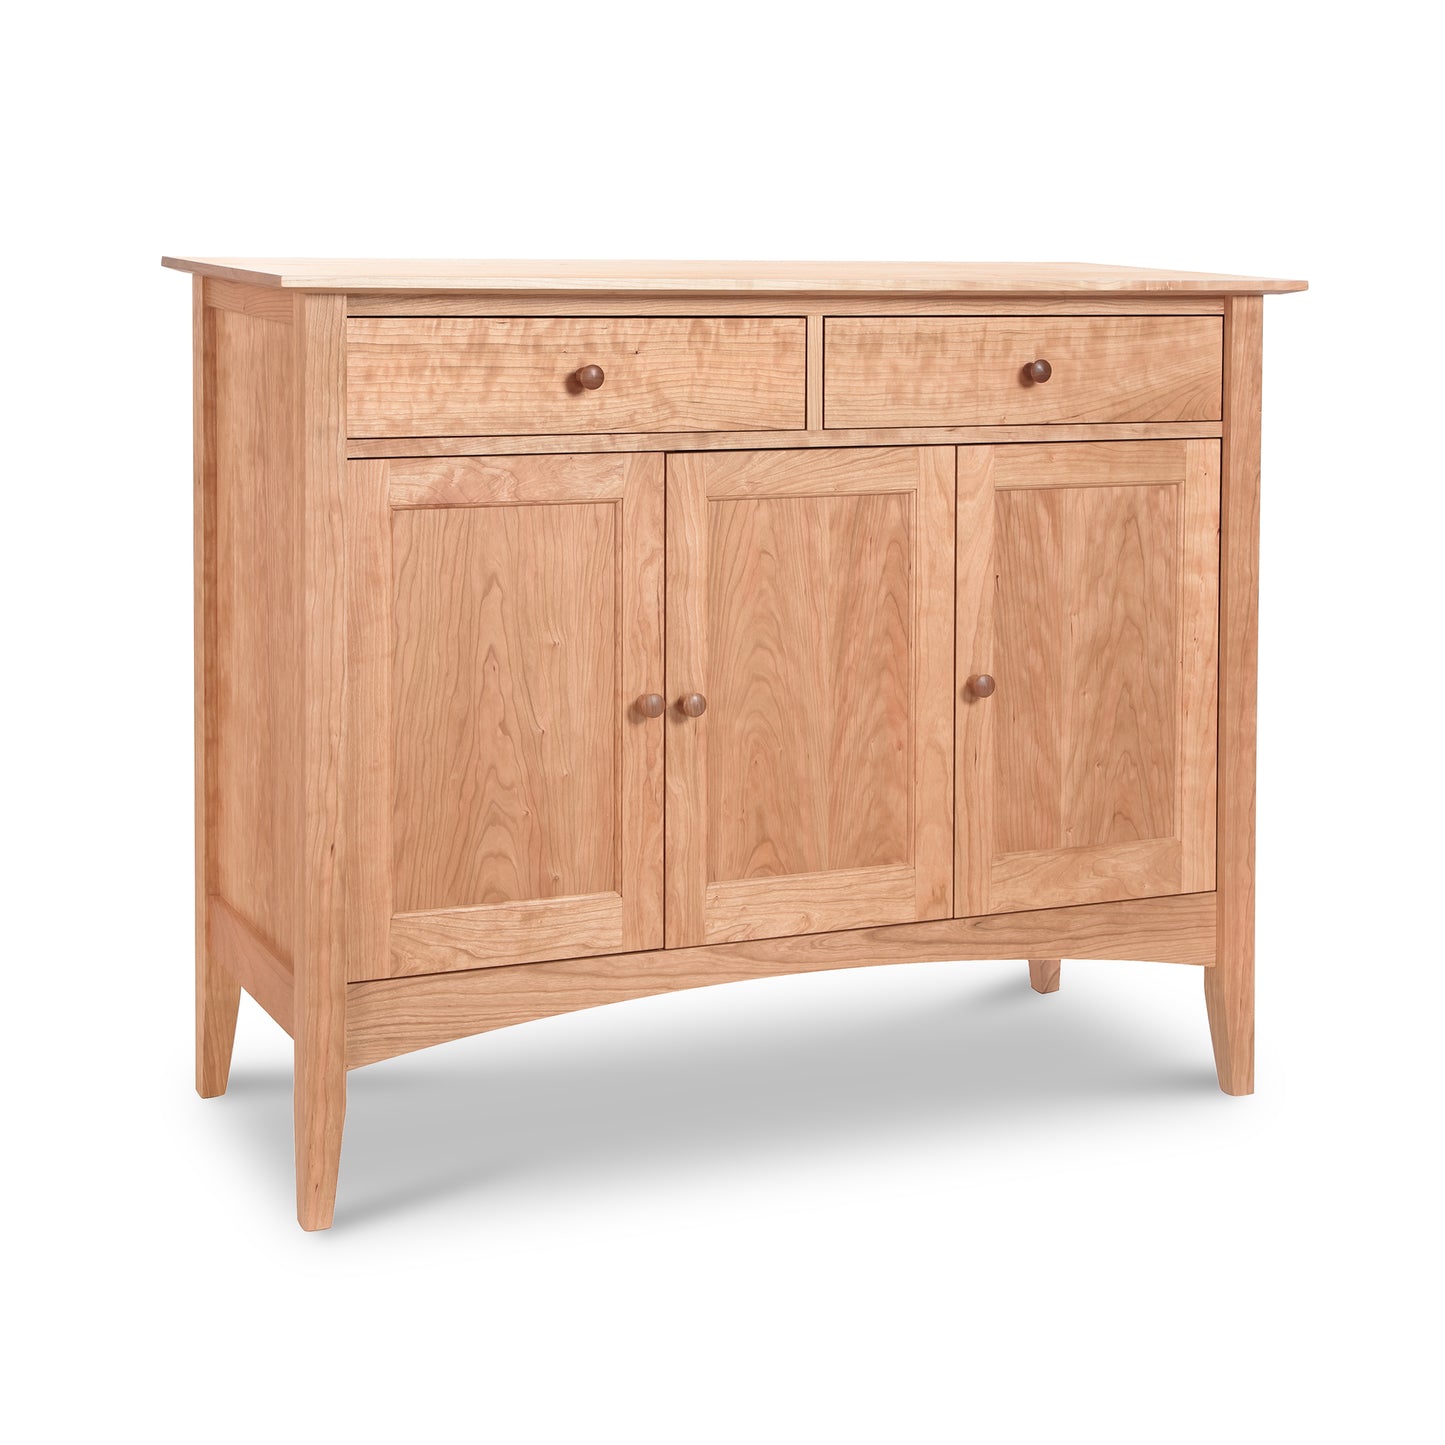 The Maple Corner Woodworks American Shaker Sideboard showcases Vermont craftsmanship with its solid hardwood construction. It features two drawers and two doors, providing convenient storage options.